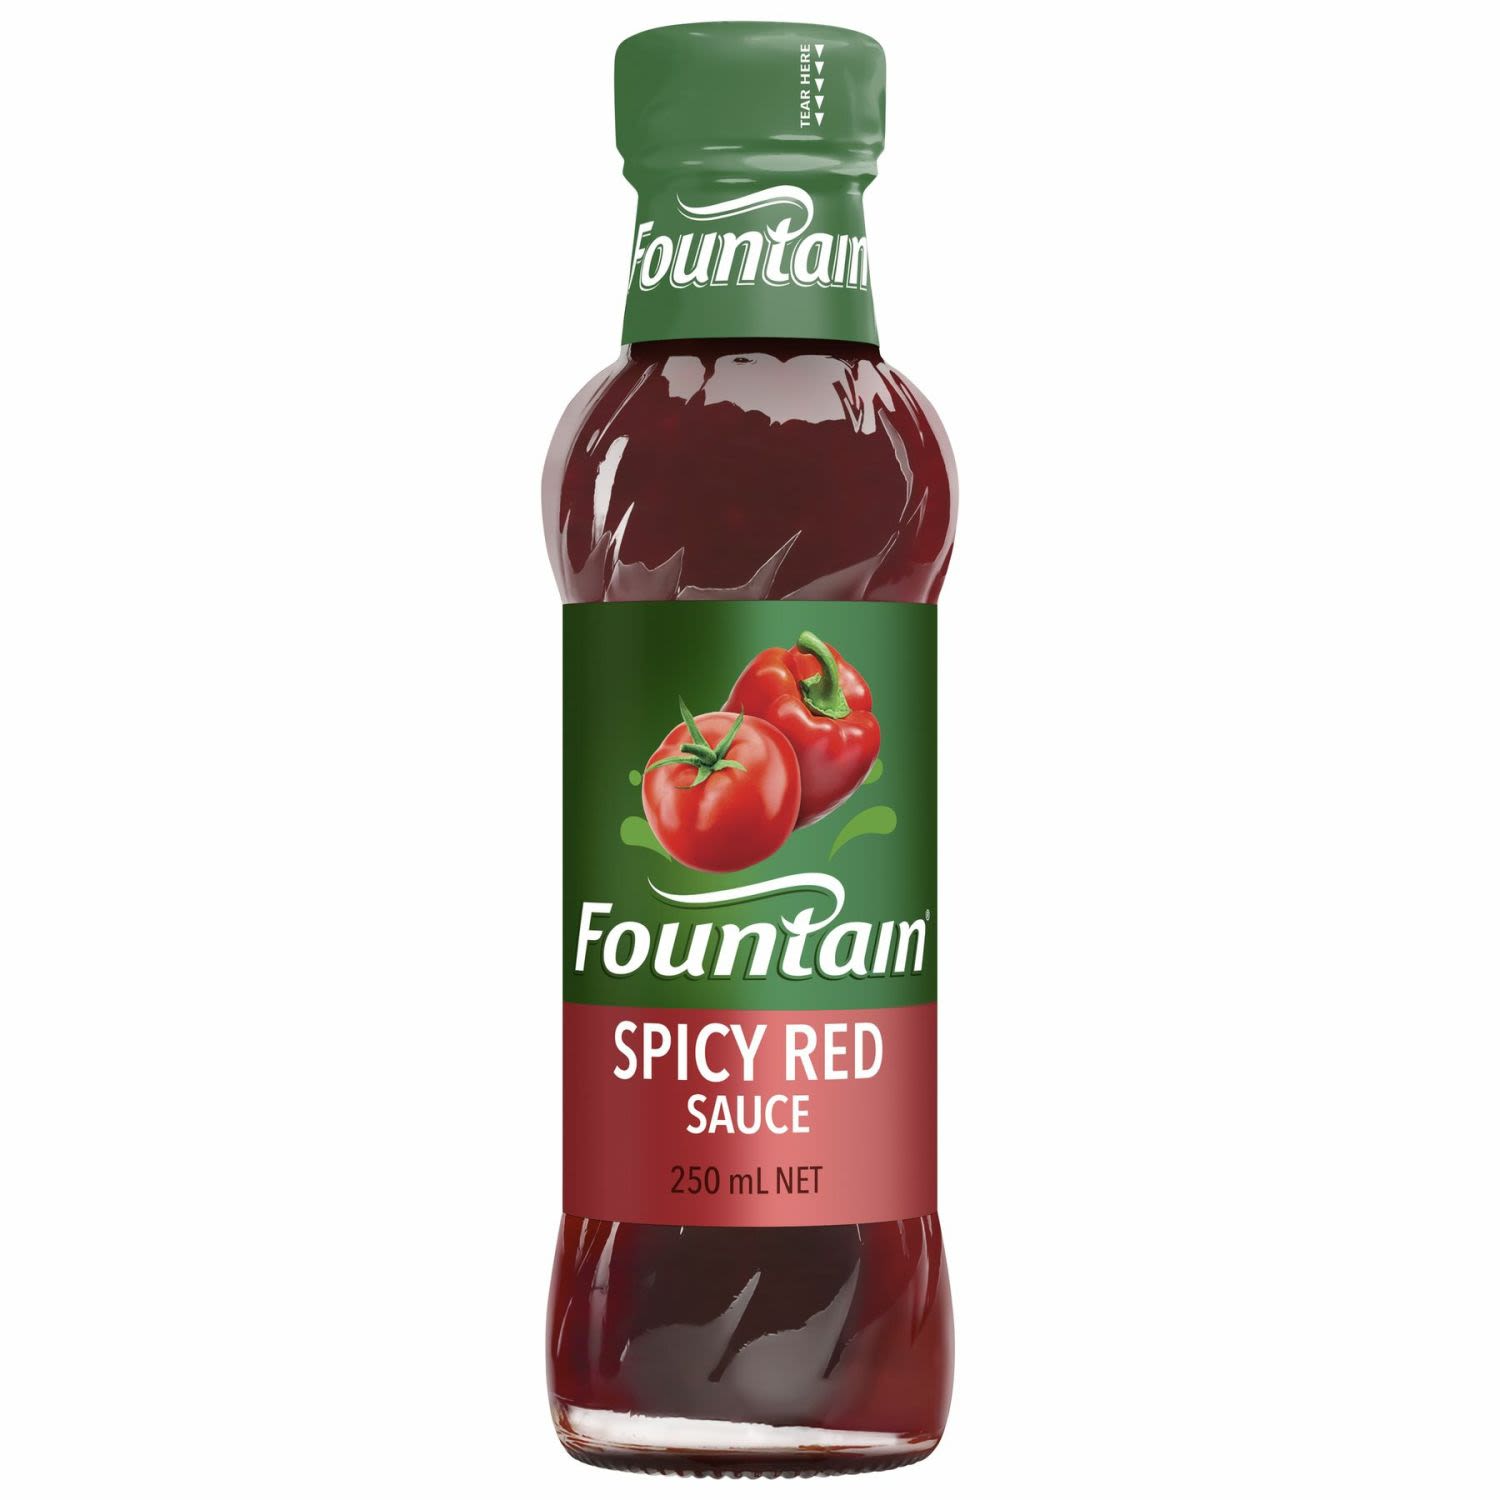 Fountain Spicy Red Sauce, 250 Millilitre